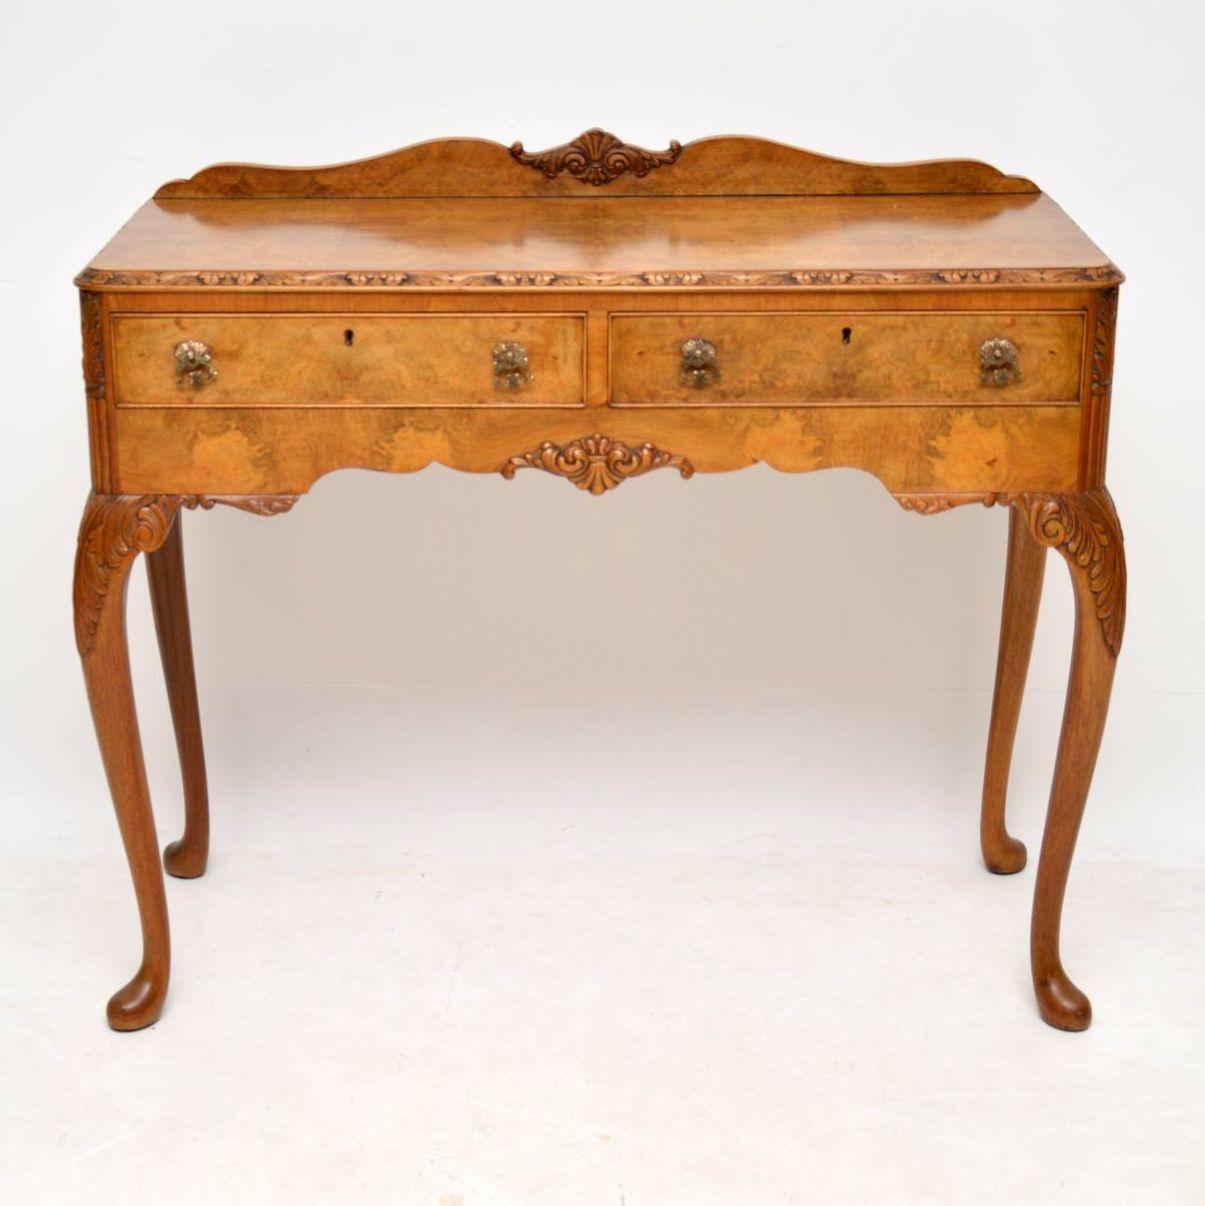 Fine quality and impressive walnut server side table in excellent original condition. The carved back section, the top and the front is all burr walnut with some lovely patterns. There are Fine carvings around the top edge, the sides, the middle and